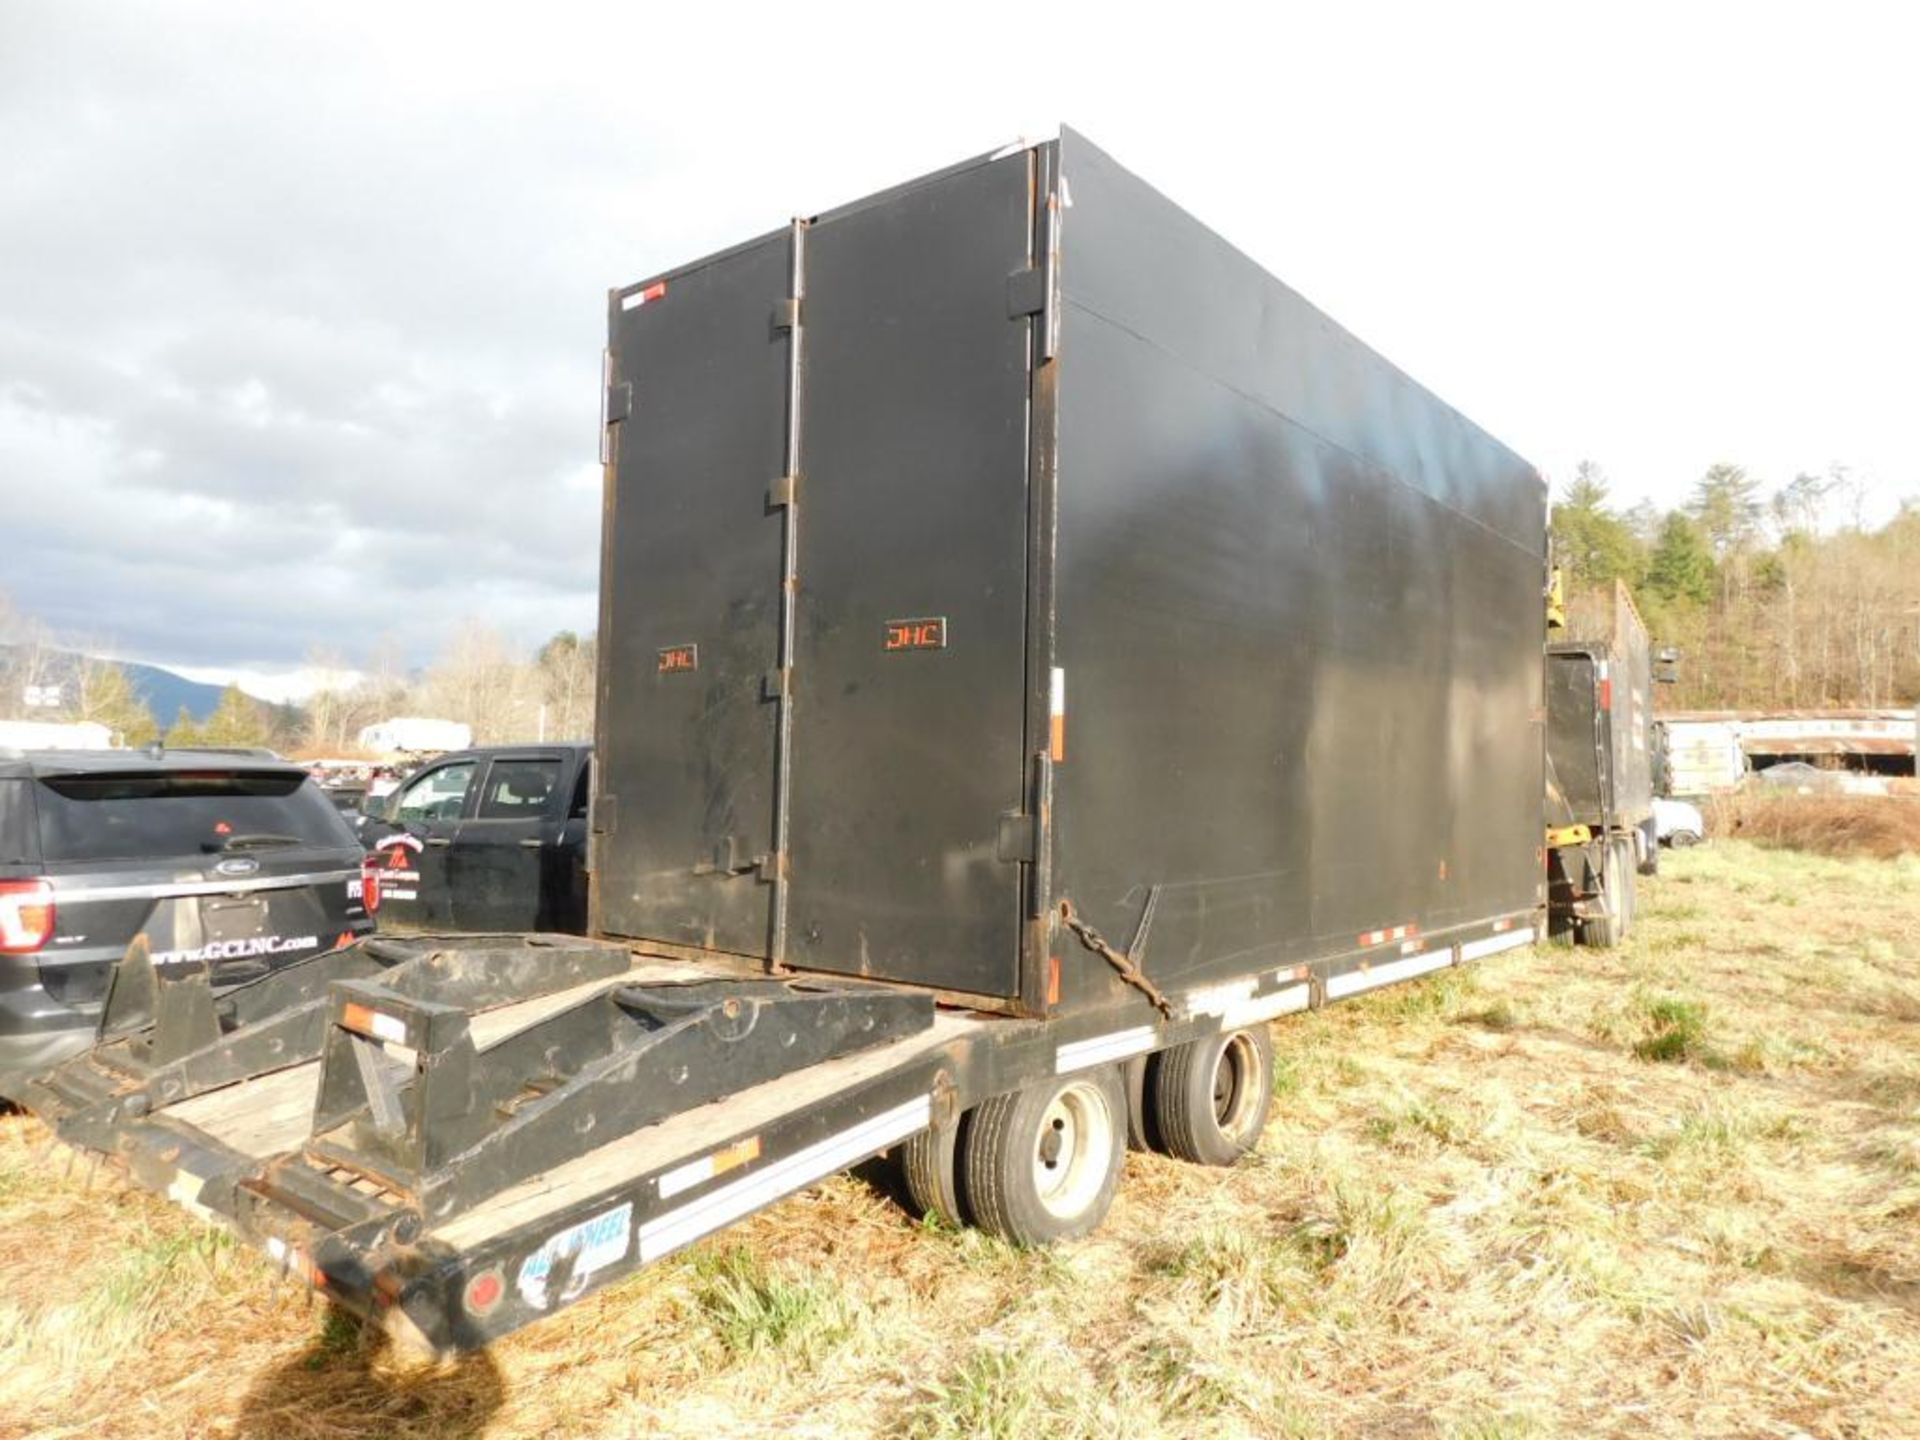 2004 Eager Beaver 28' Overall Trailer w/7' Beaver Tail Ramps, 102" Wide Trailer, Approximately 40 Ya